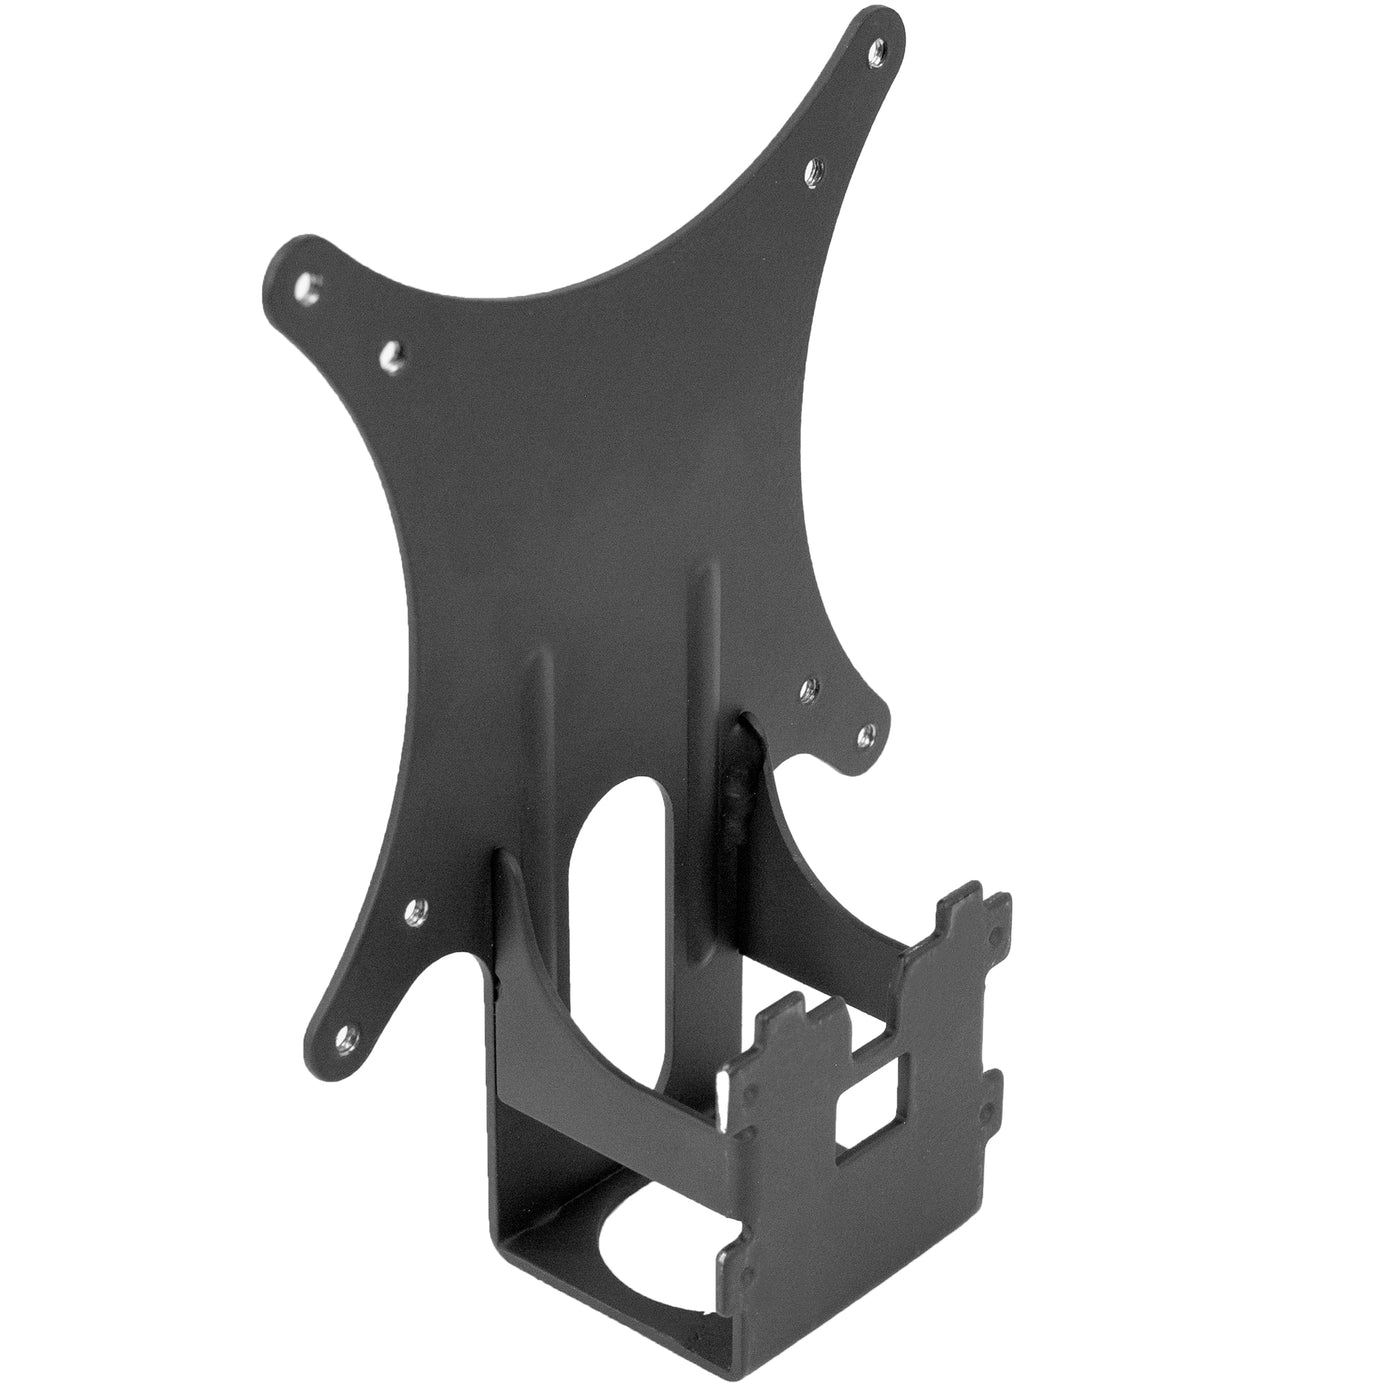 Solid steel DELL monitor mount plate.